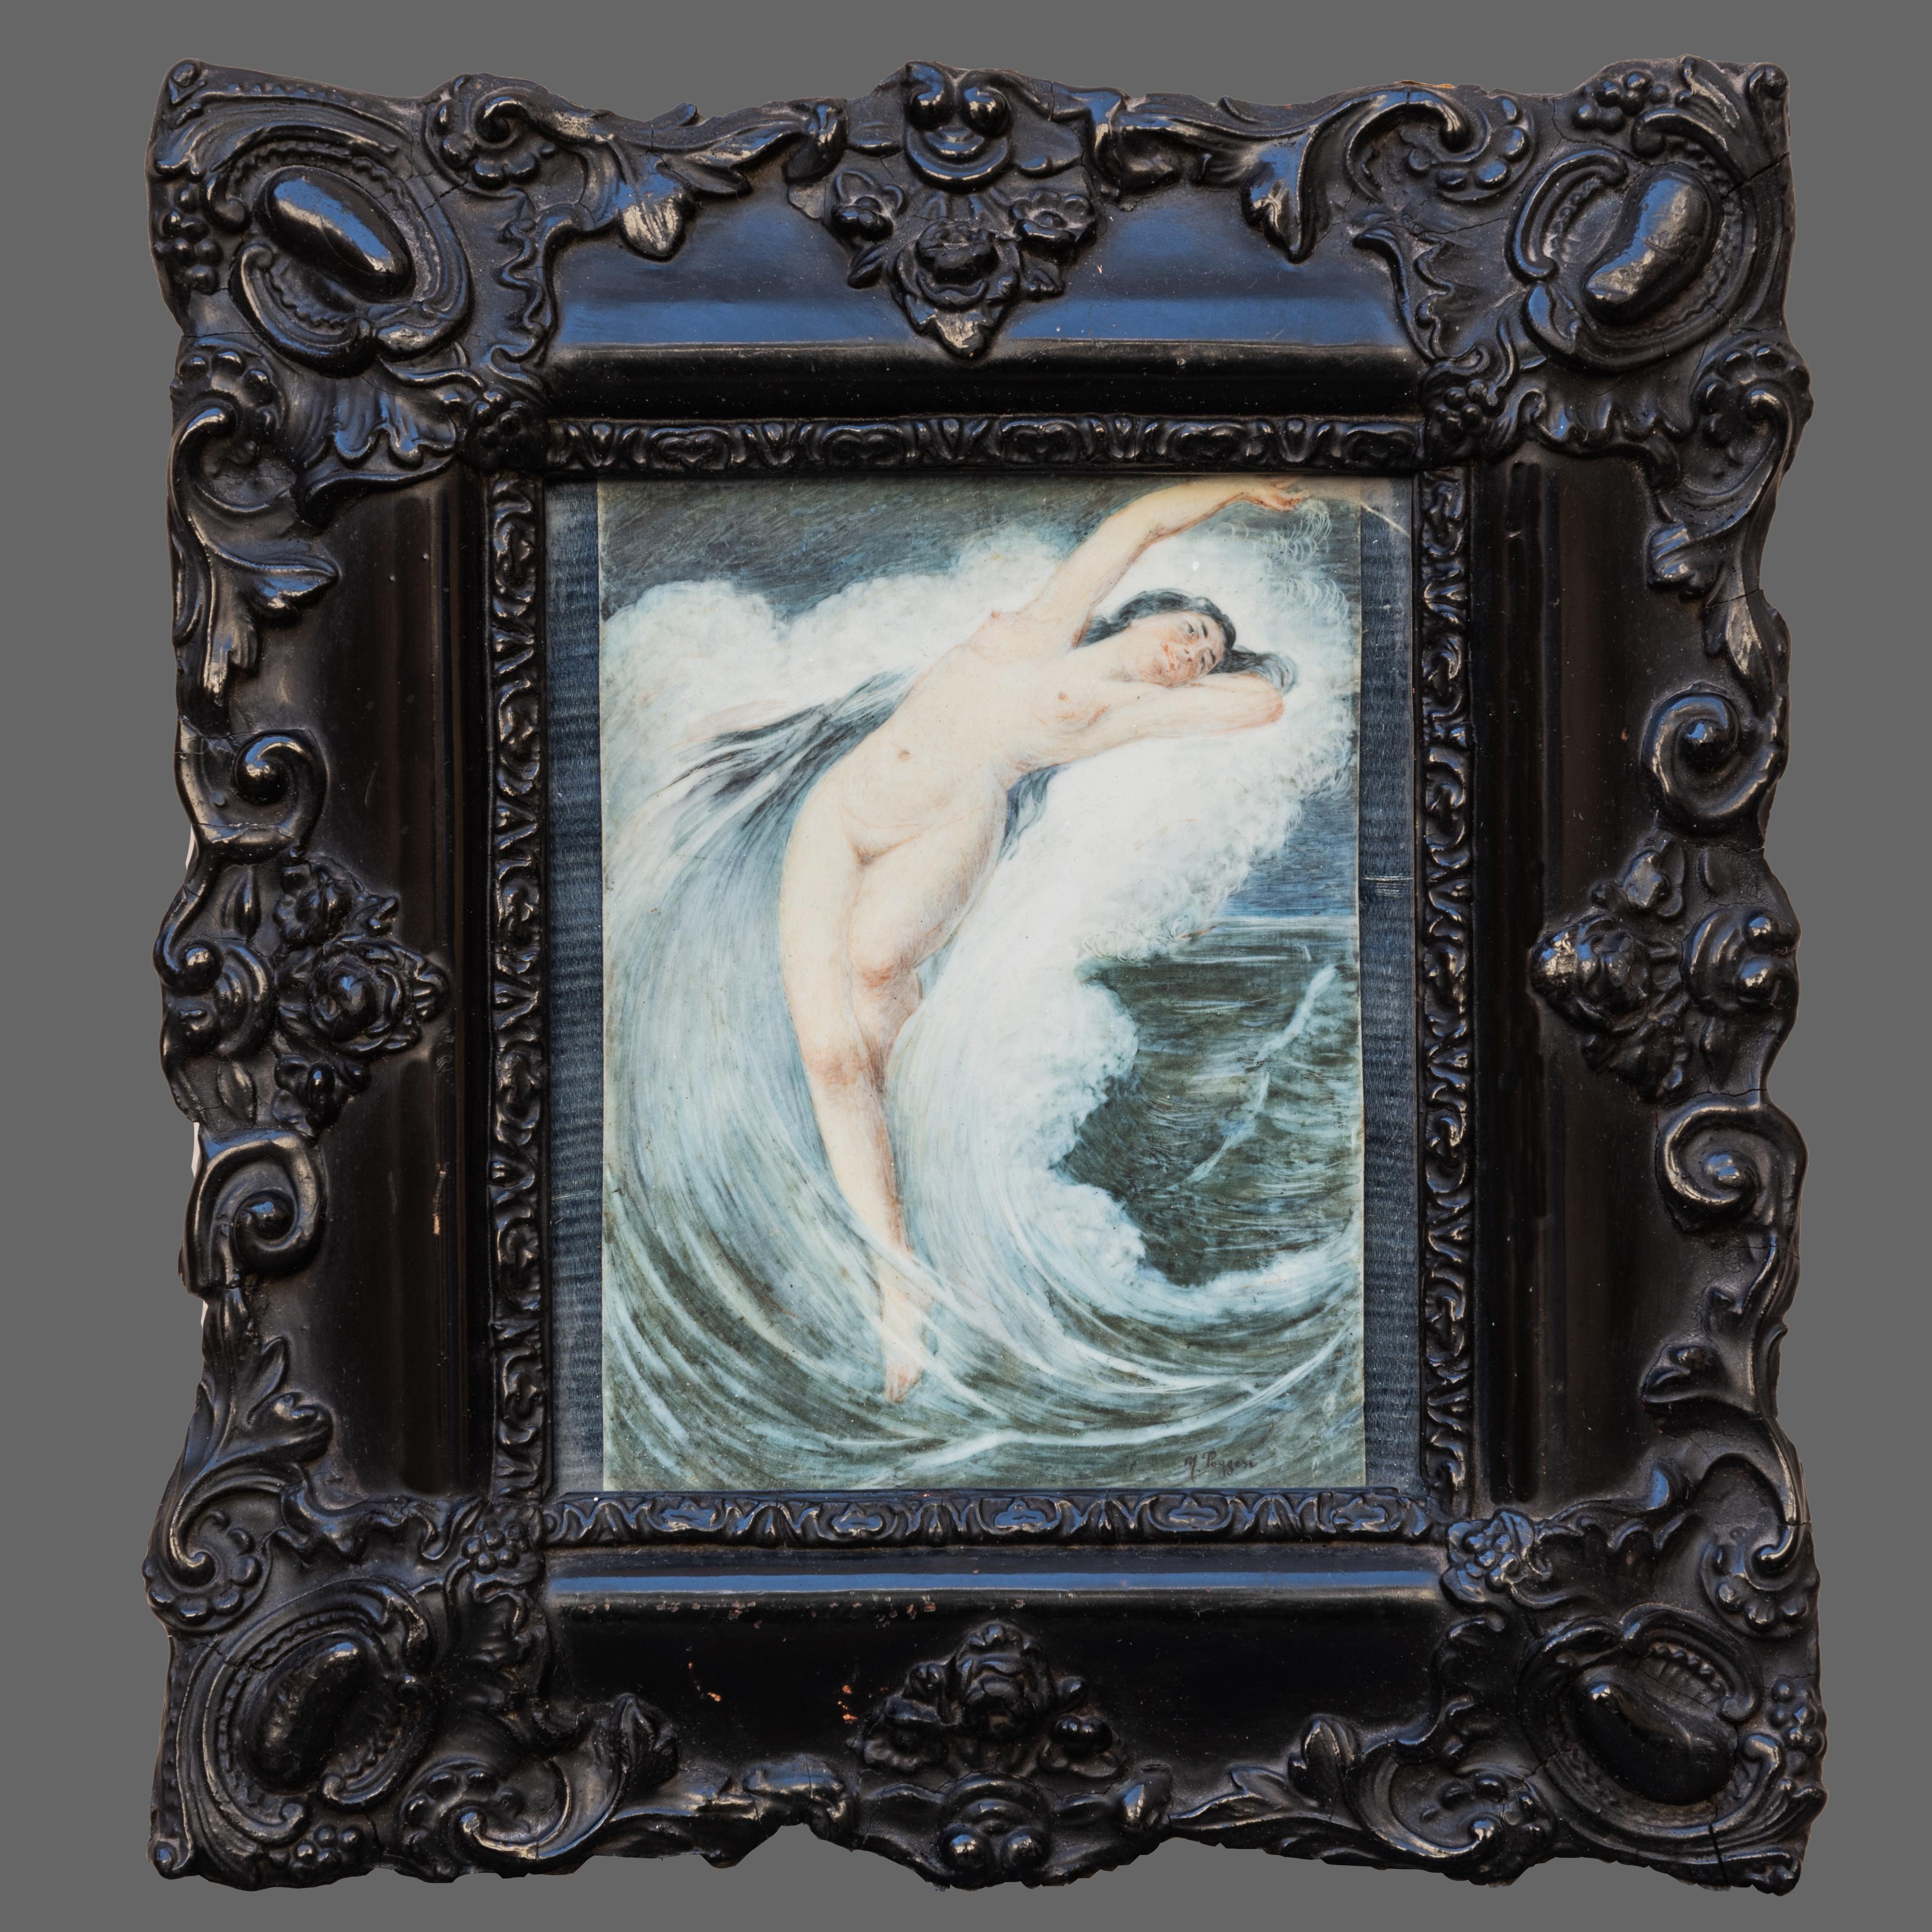 Important miniature representing a beautiful nude of a woman painted in the waves of the sea.
Signed M. Poggesi, Italian artist of the first half of the 19th century.
Elegant handmade ebonised wood frame.
Art Deco period.

Every item of our Gallery,